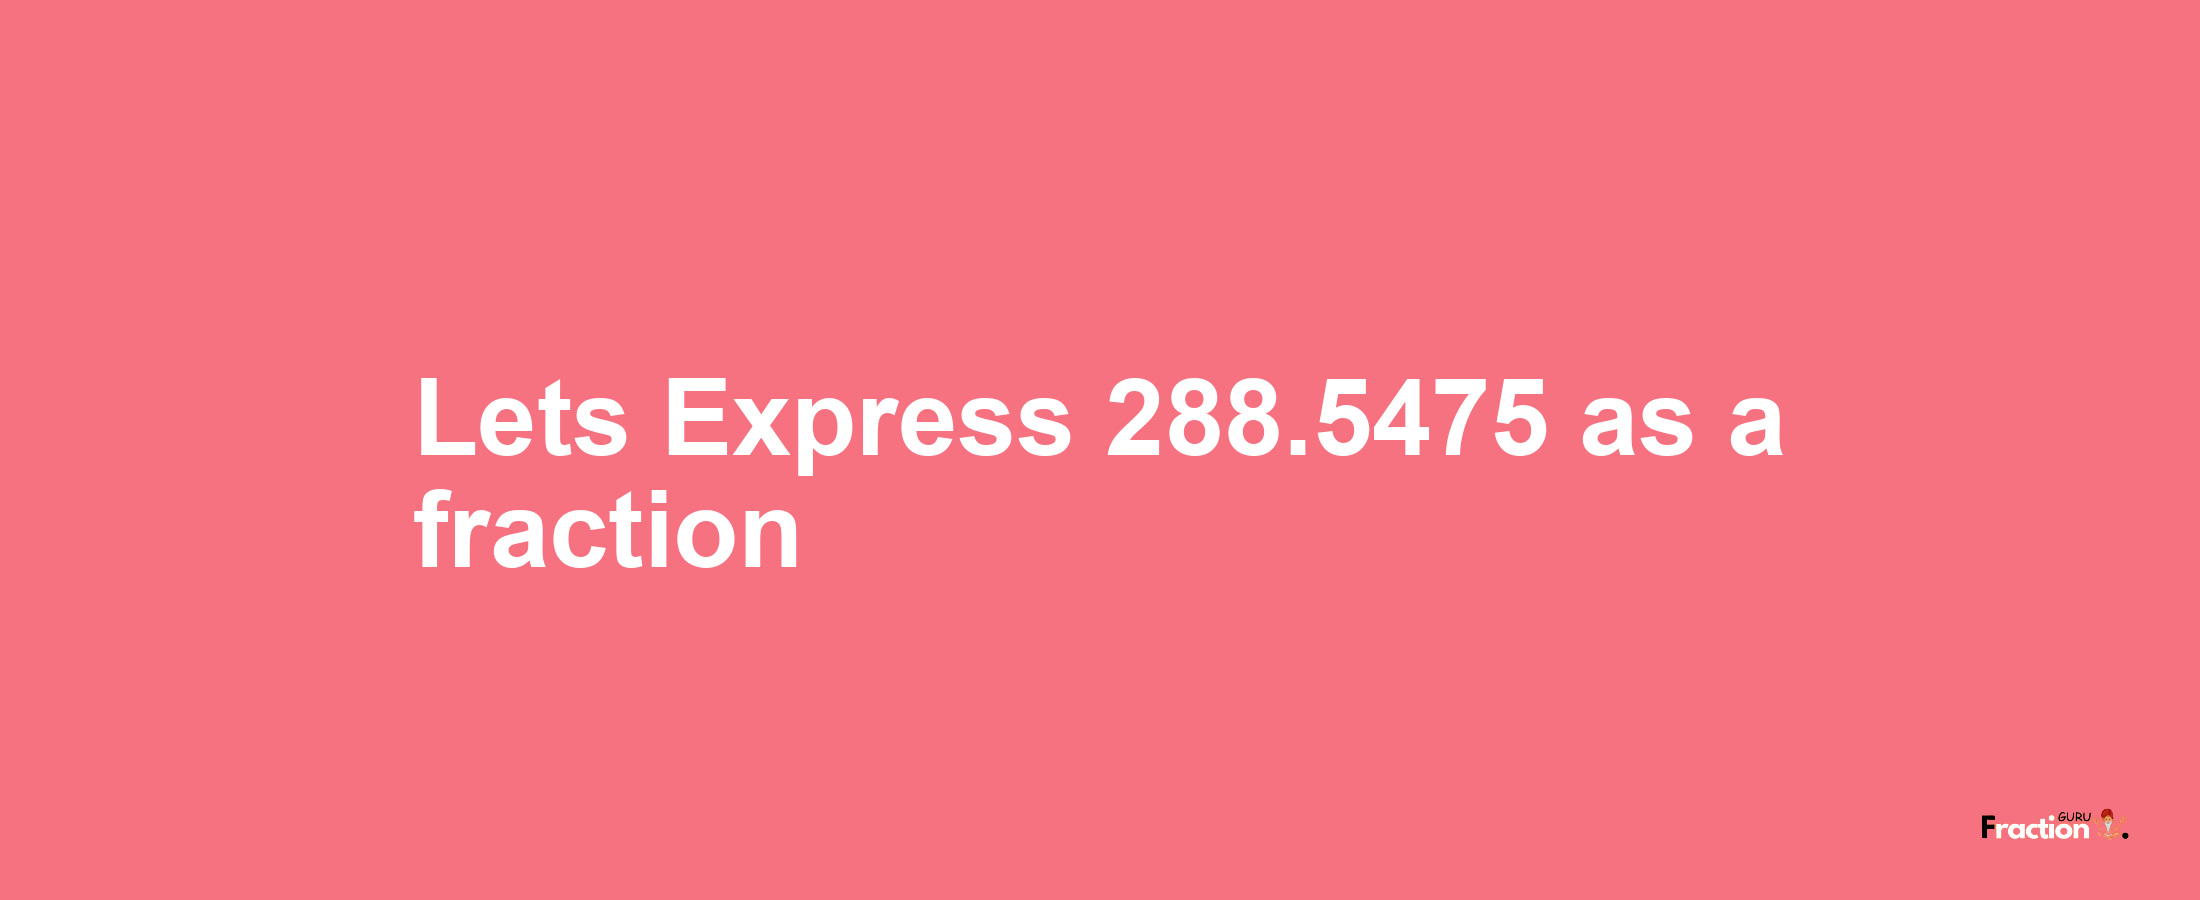 Lets Express 288.5475 as afraction